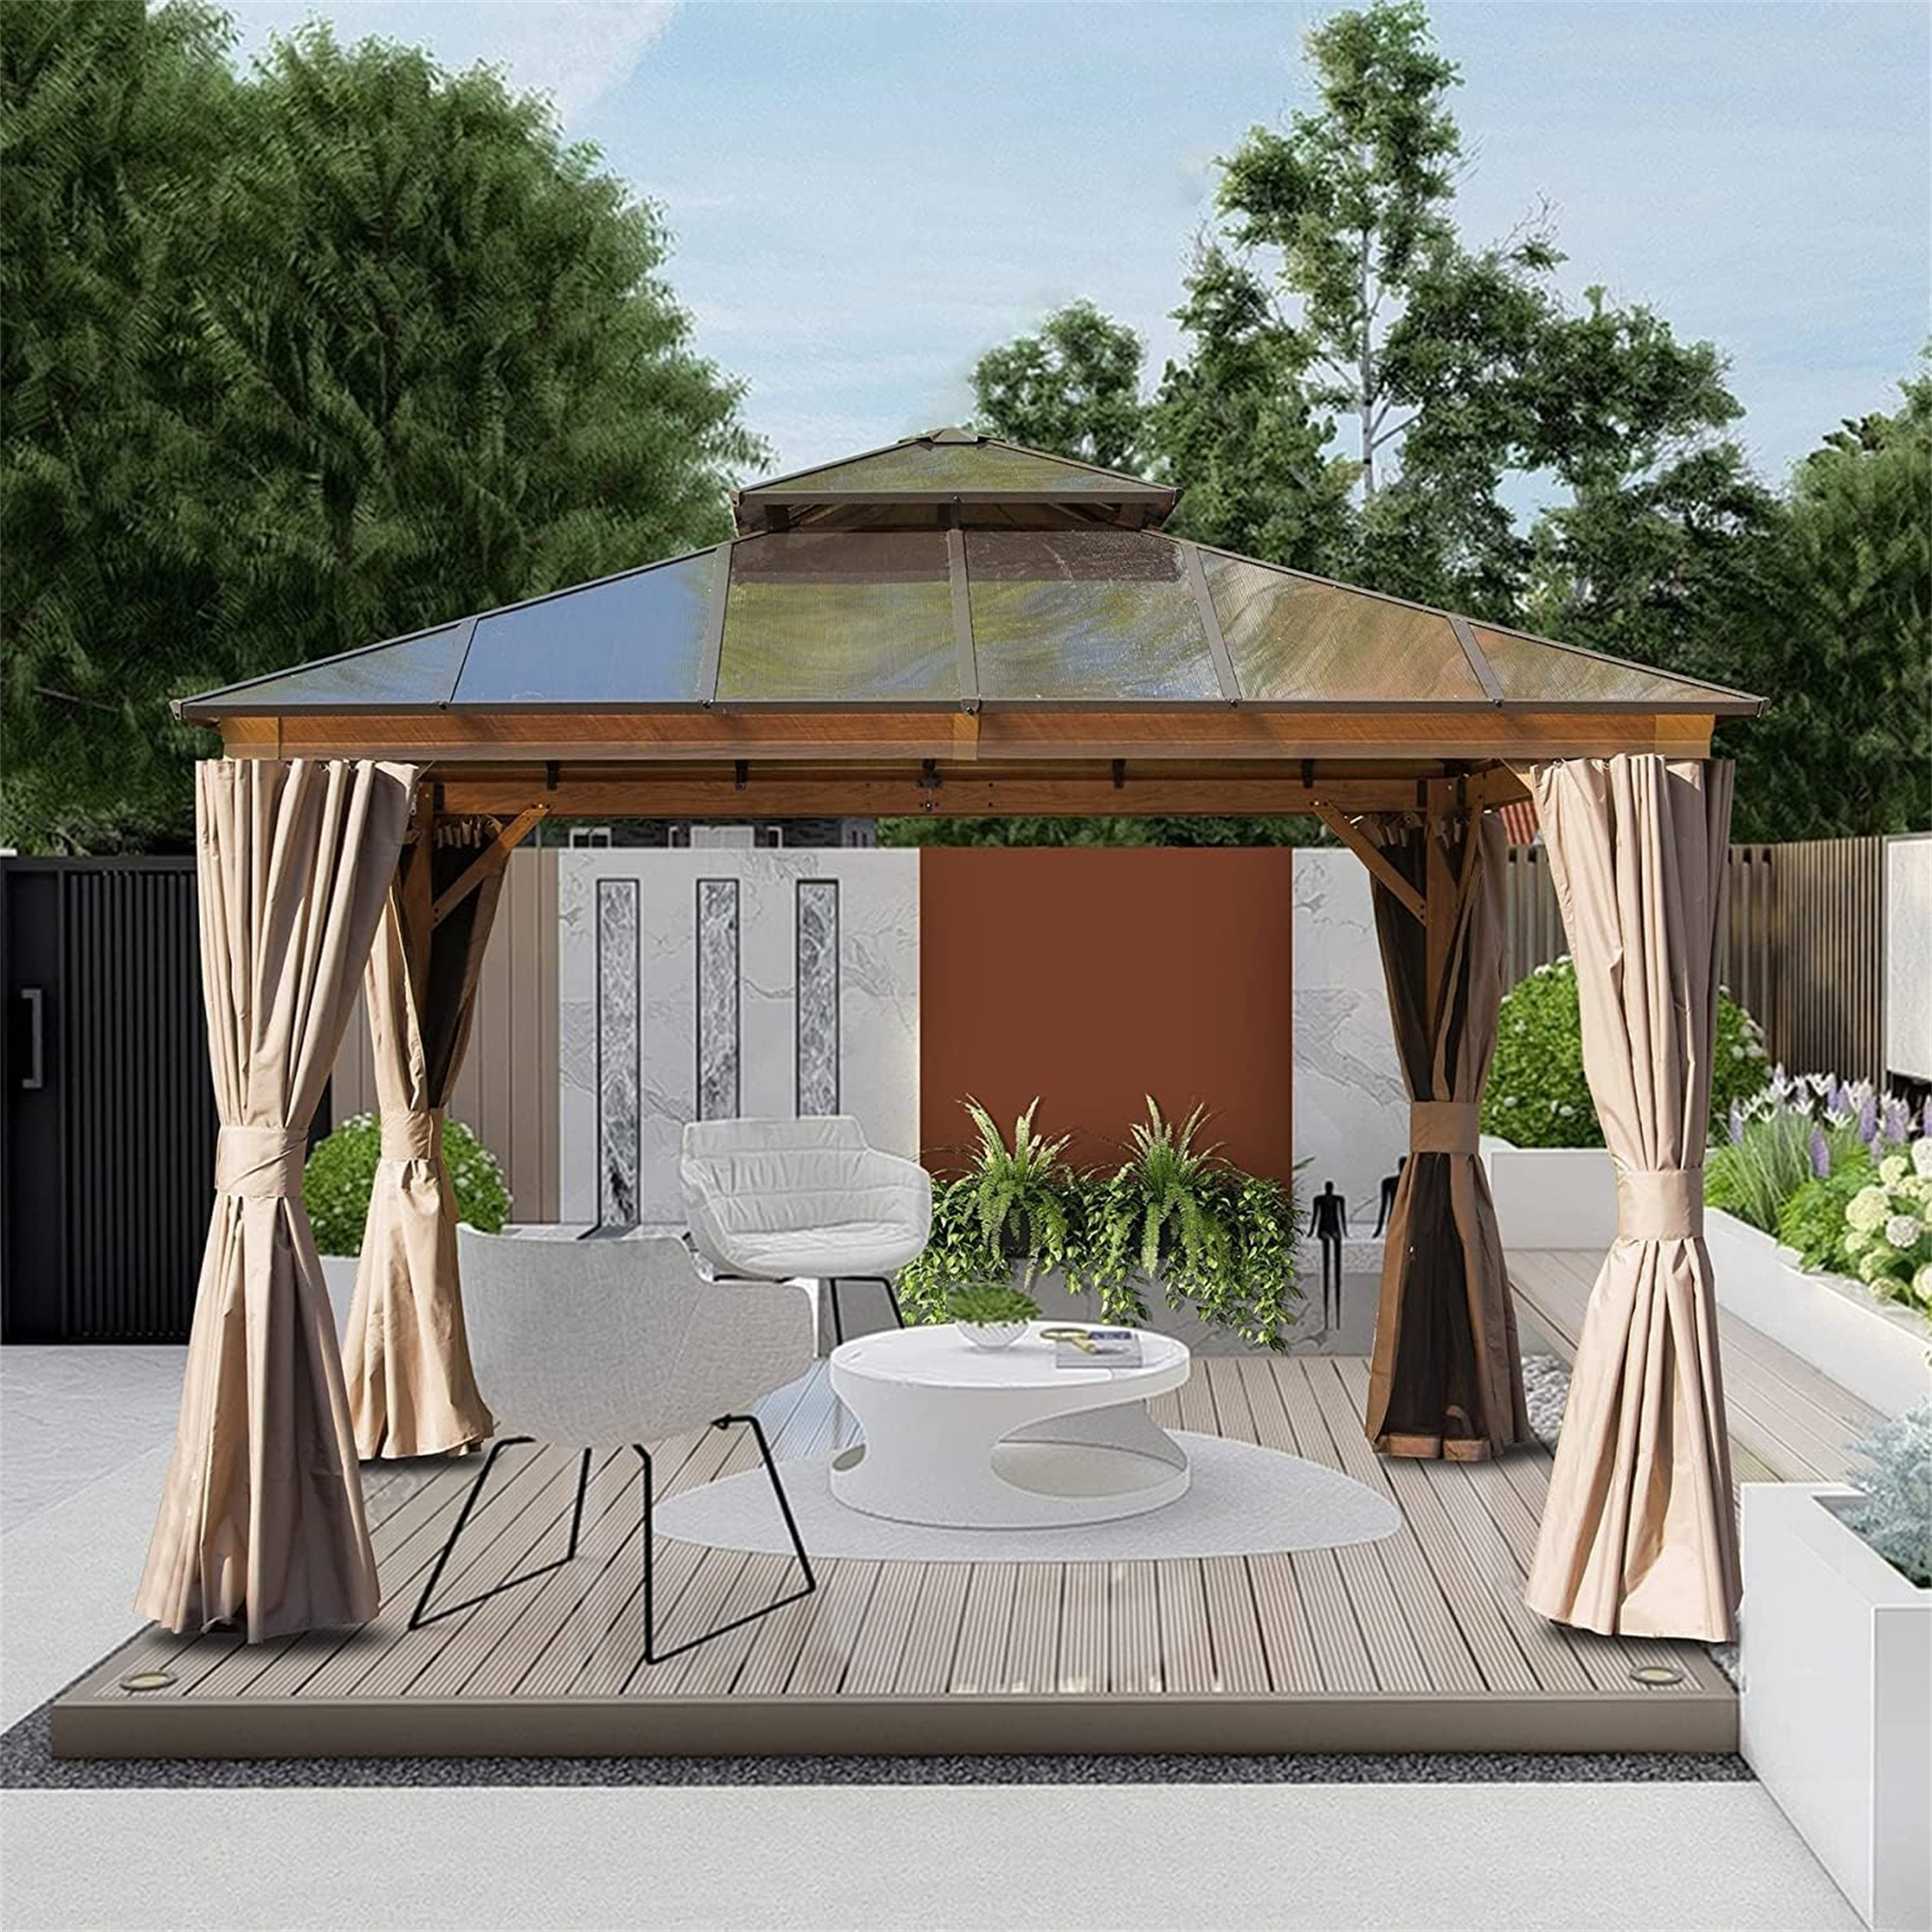 Mondawe Outdoor Sanctuary 12x12 Ft Hardtop Gazebo Elegant and Durable Pavilion with Polycarbonate Double Roof, Curtains, and Net for Gardens, Patios, Lawns, Decks, and Backyards